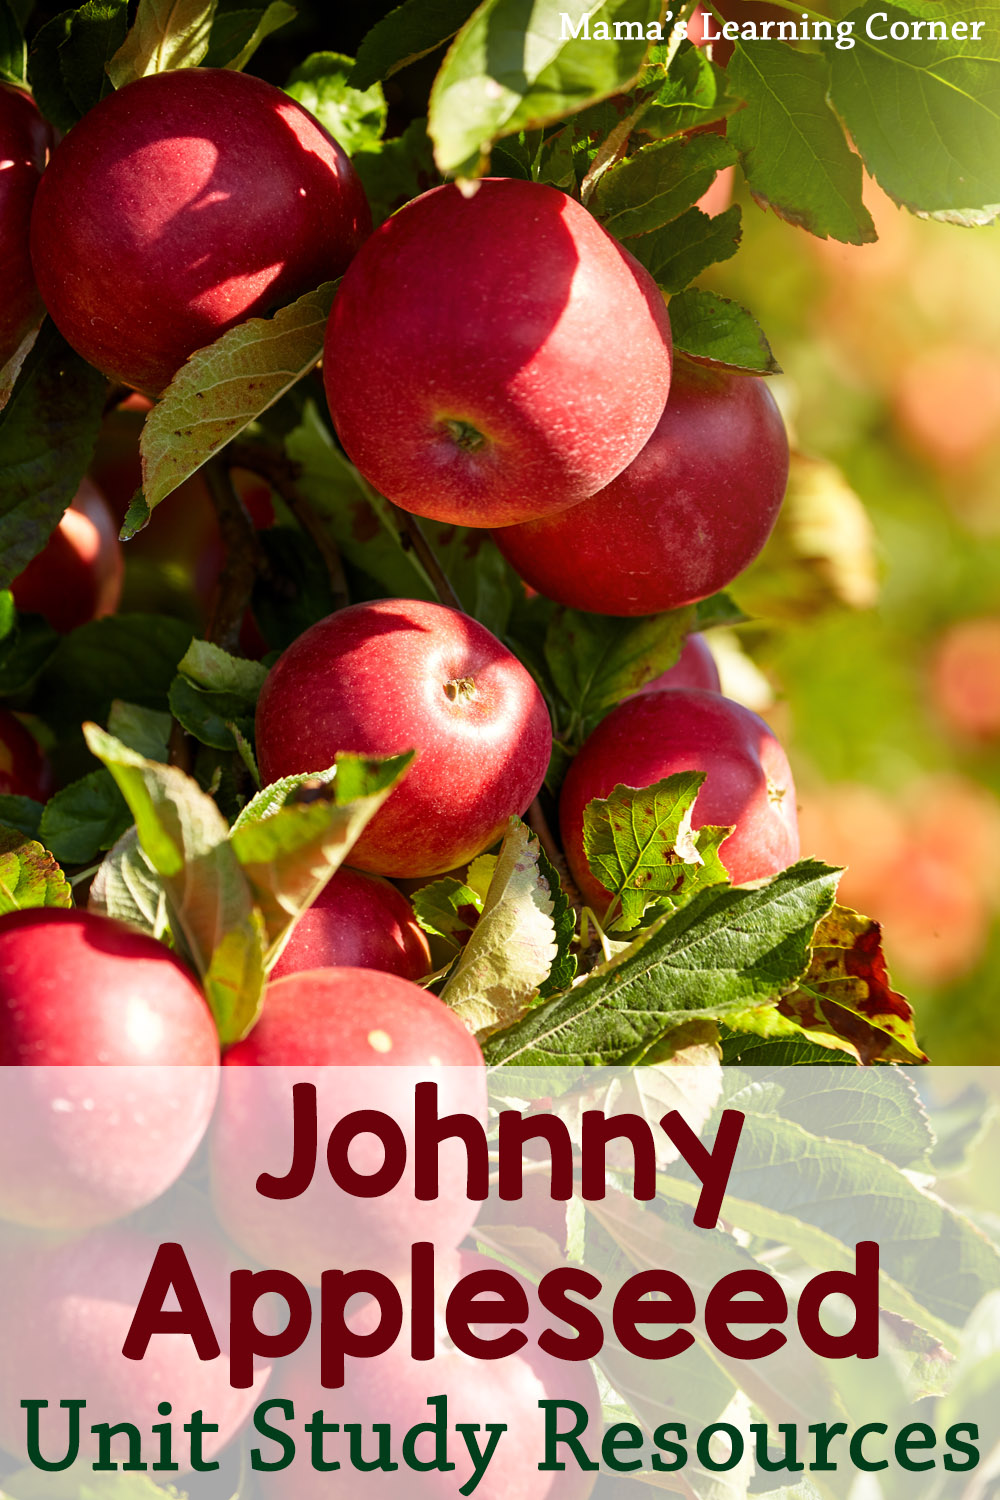 johnny-appleseed-worksheets-and-unit-study-resources-mamas-learning